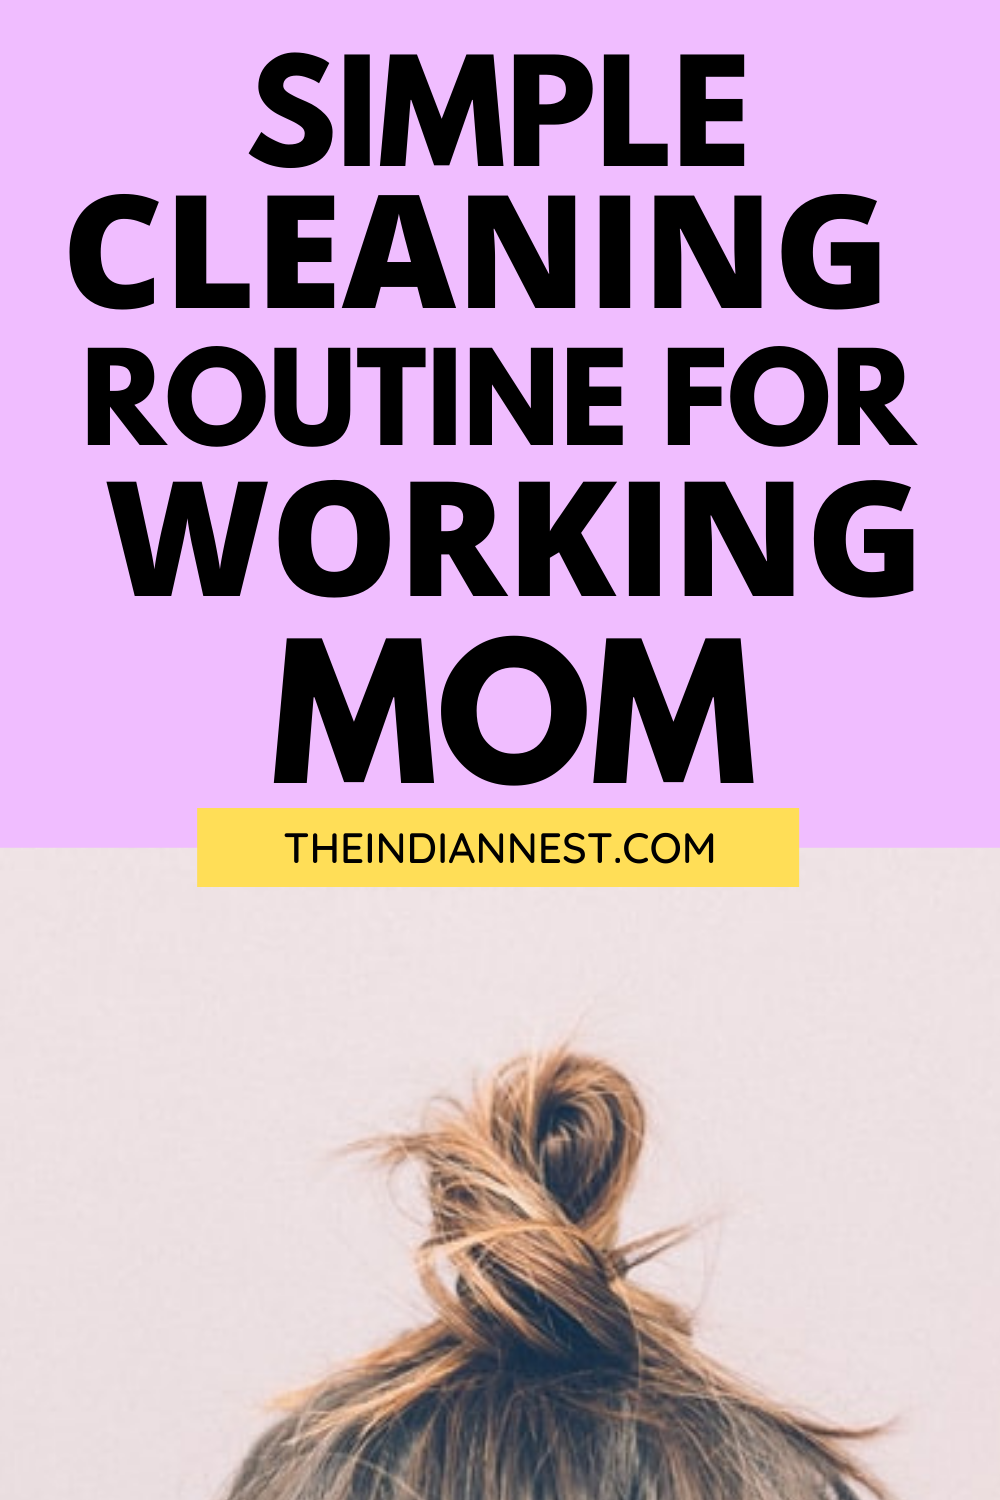 How to Create a Cleaning Schedule for Working Moms and other busy people. Here's exactly how to create a simple cleaning schedule for working moms. Learn tips on what items to do daily and which to do weekly and monthly, how to incorporate a kids chore list, and stay organized with your housekeeping.